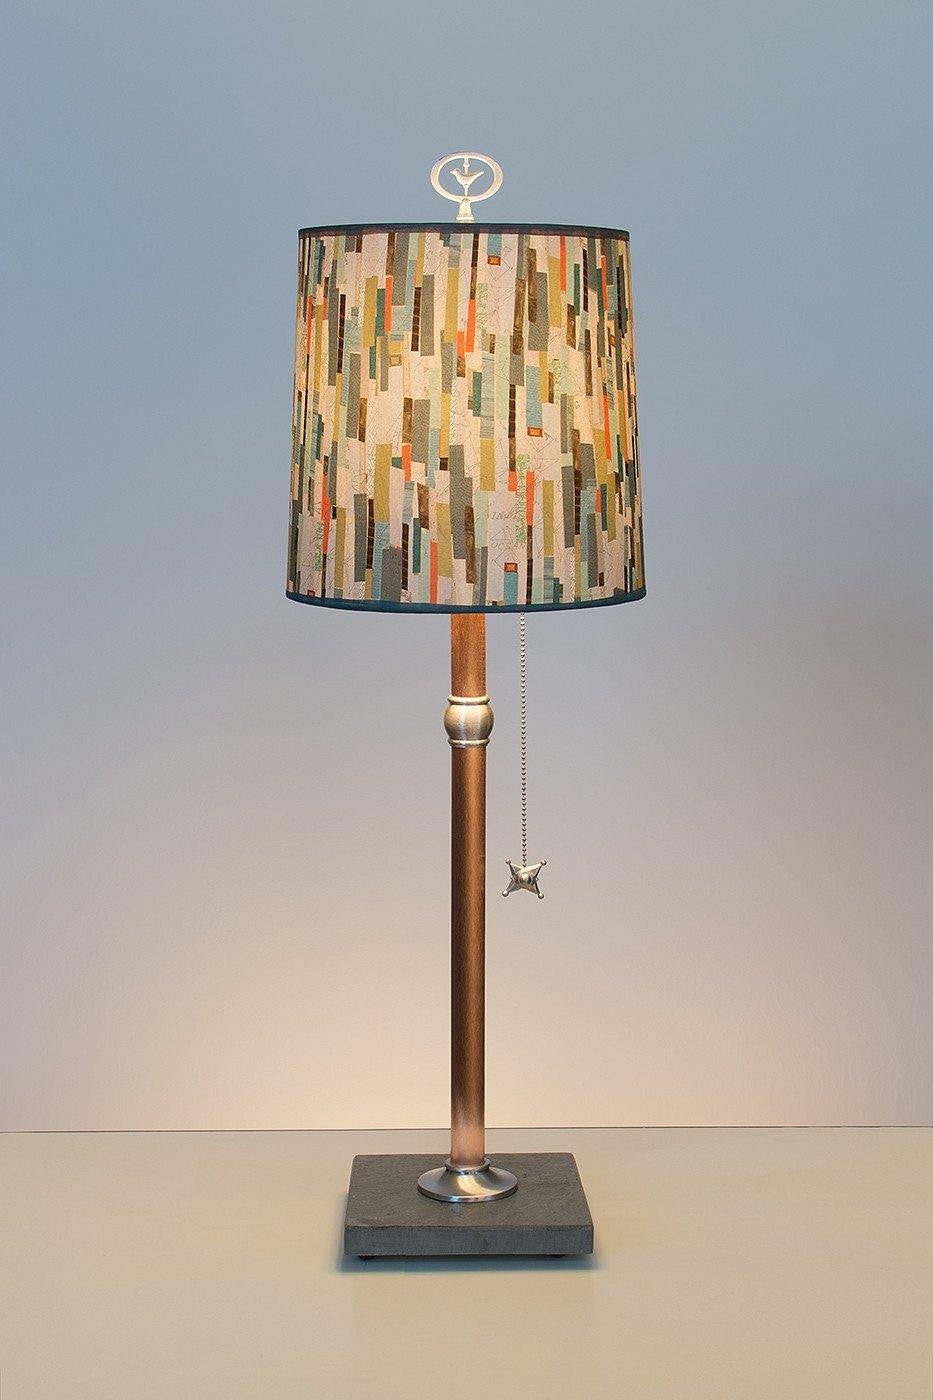 Janna Ugone & Co Table Lamps Copper Table Lamp with Medium Drum Shade in Papers